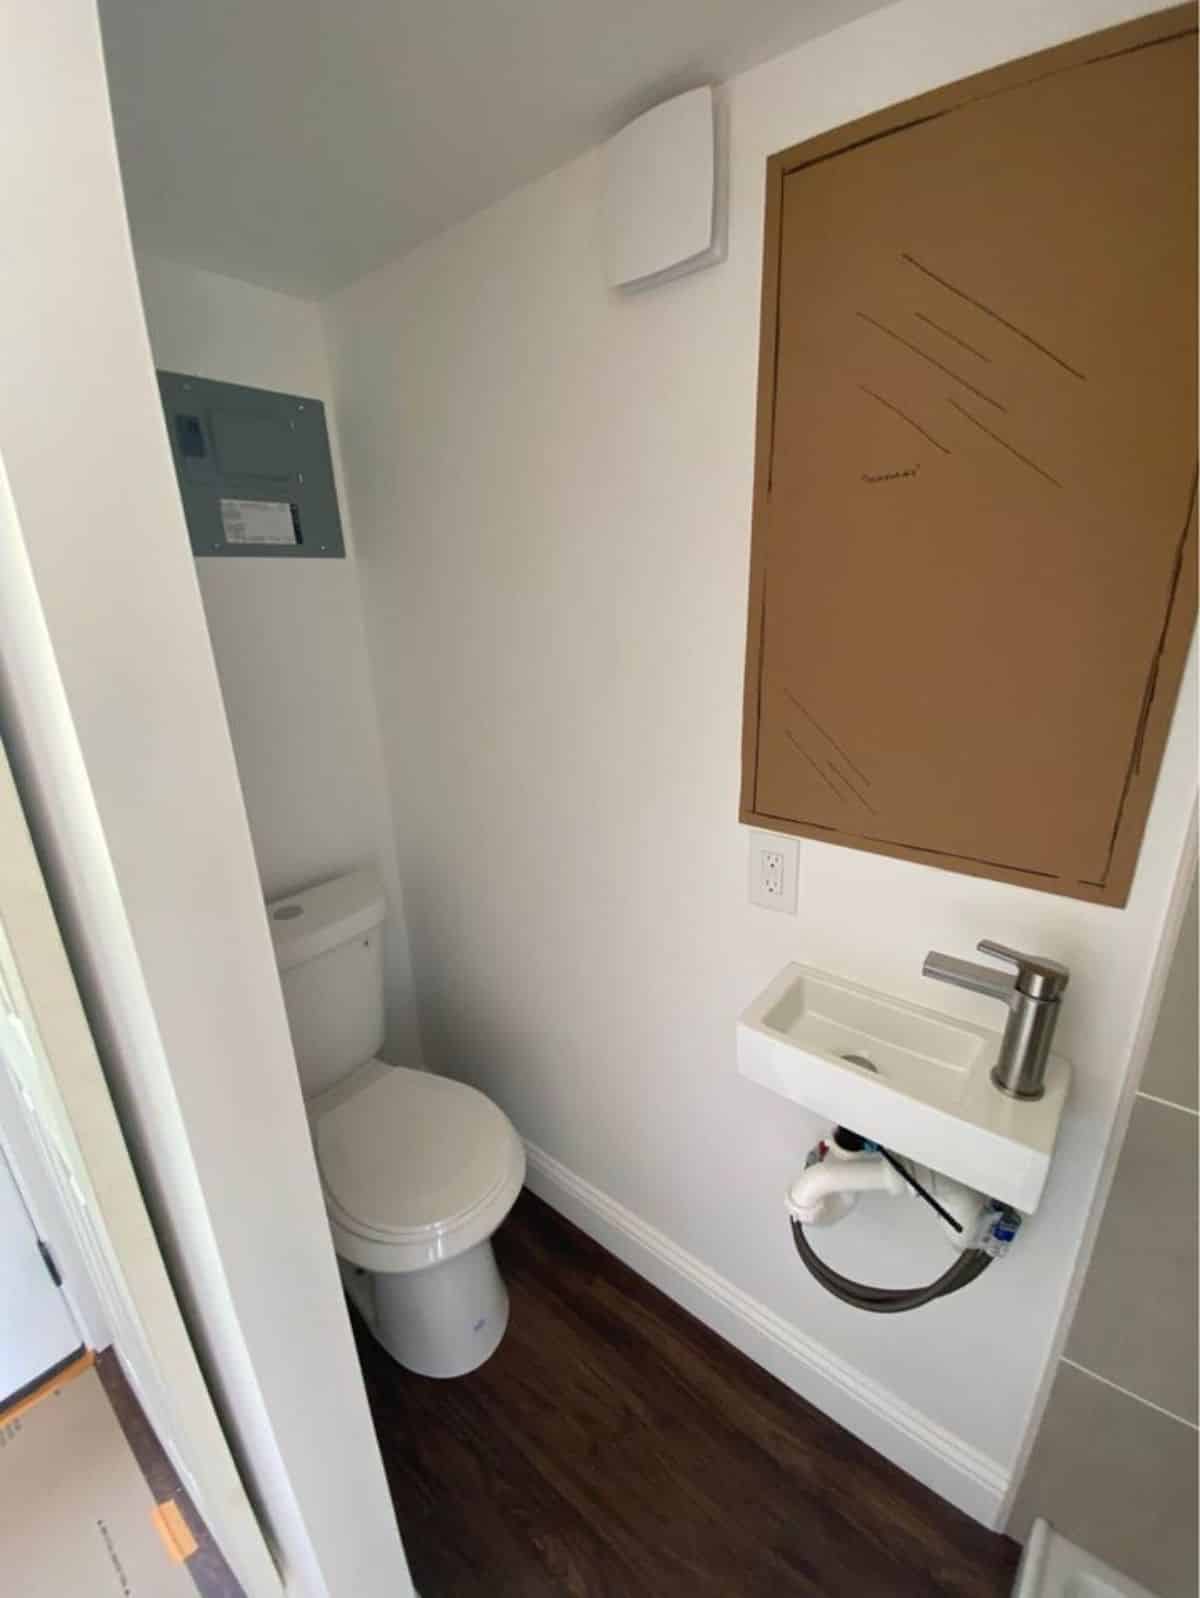 Standard toilet and sink with mirror